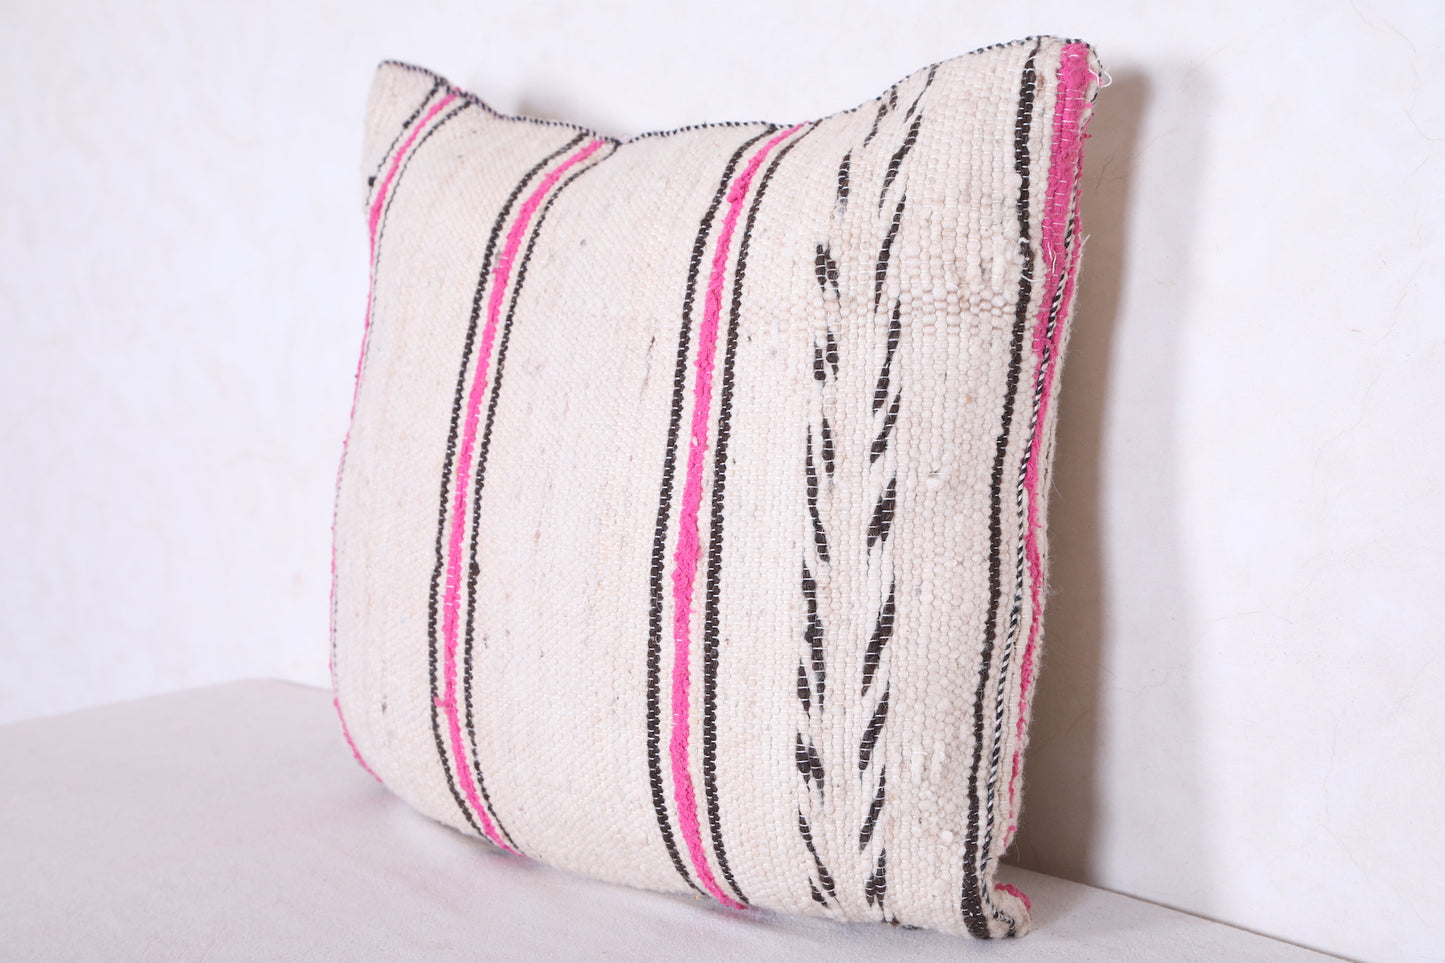 Moroccan handmade kilim pillow 18.5 INCHES X 19.6 INCHES